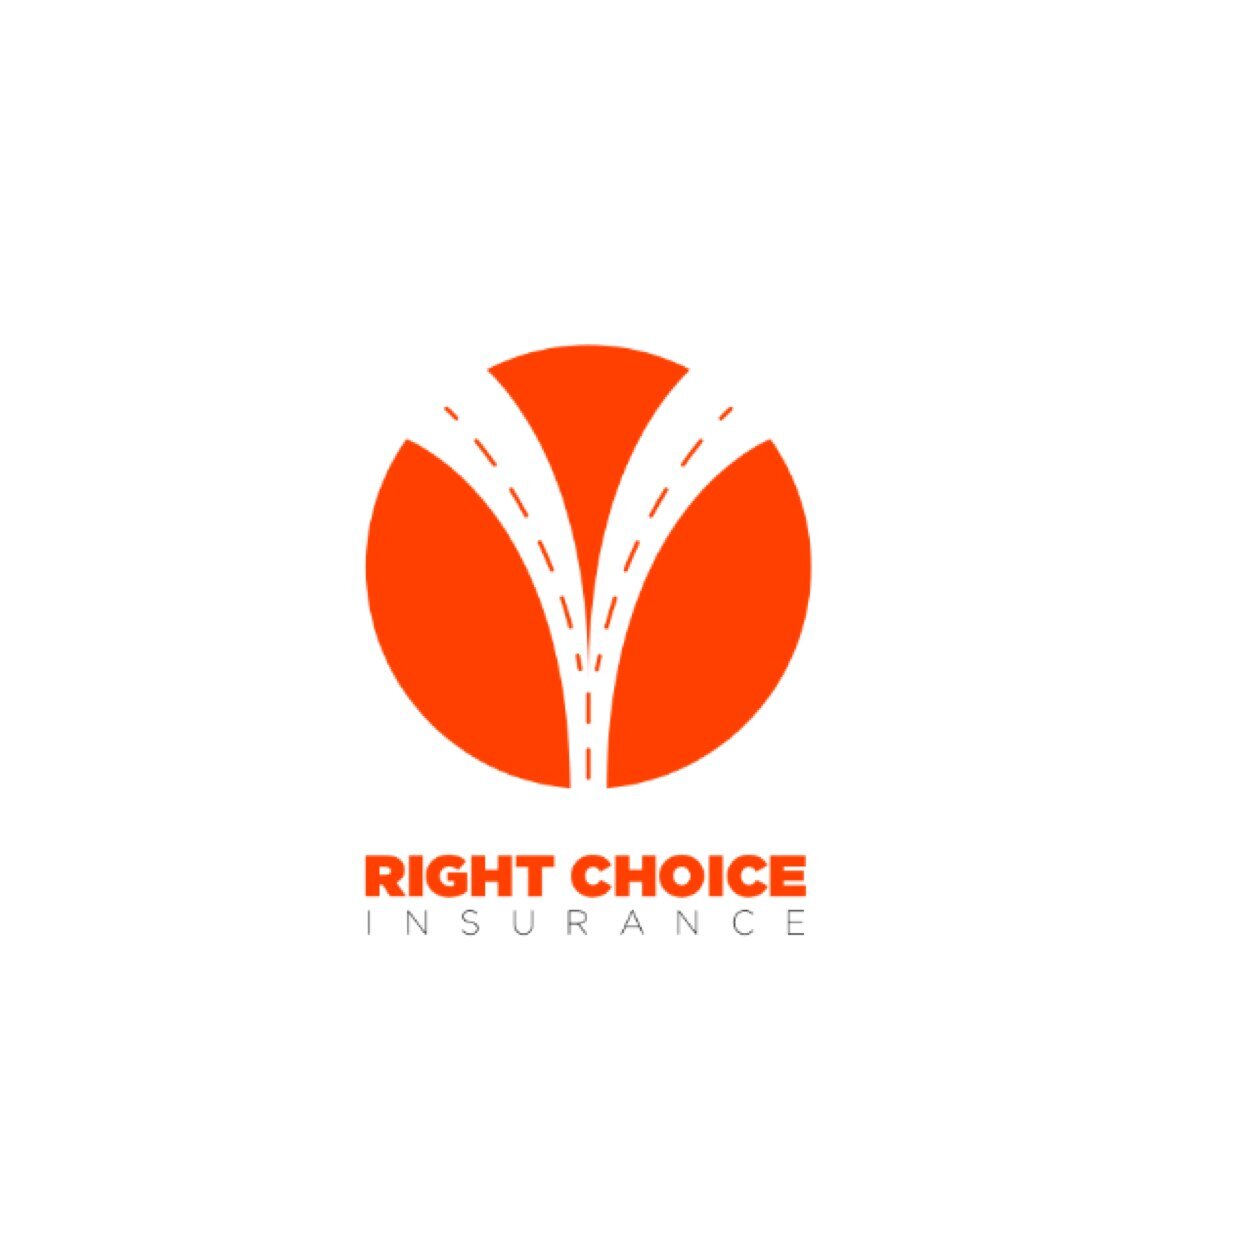 Right Choice Insurance Agency specializea in home, car, commercial and life insurance. Contact us for a quote!